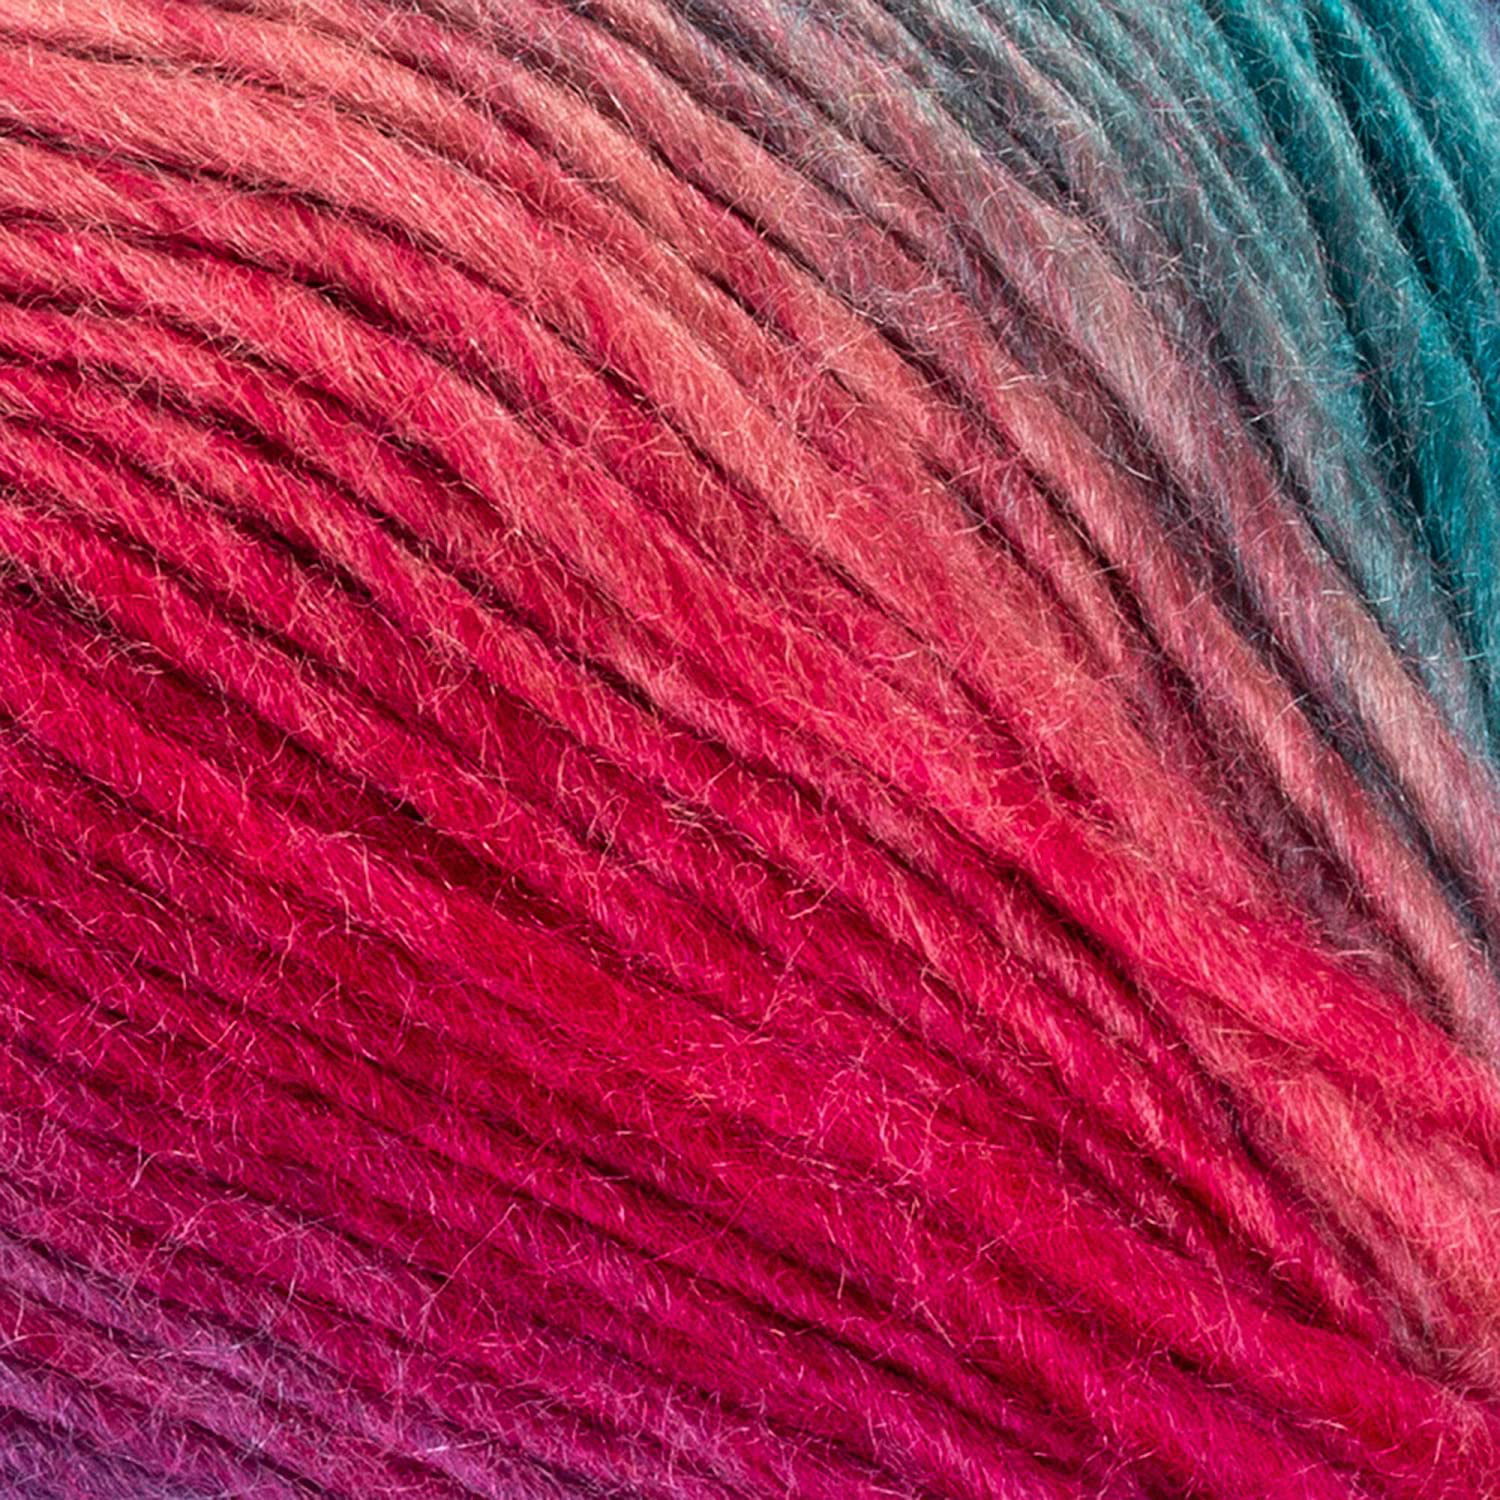 Red Heart Unforgettable Yarn Review - CraftEaze